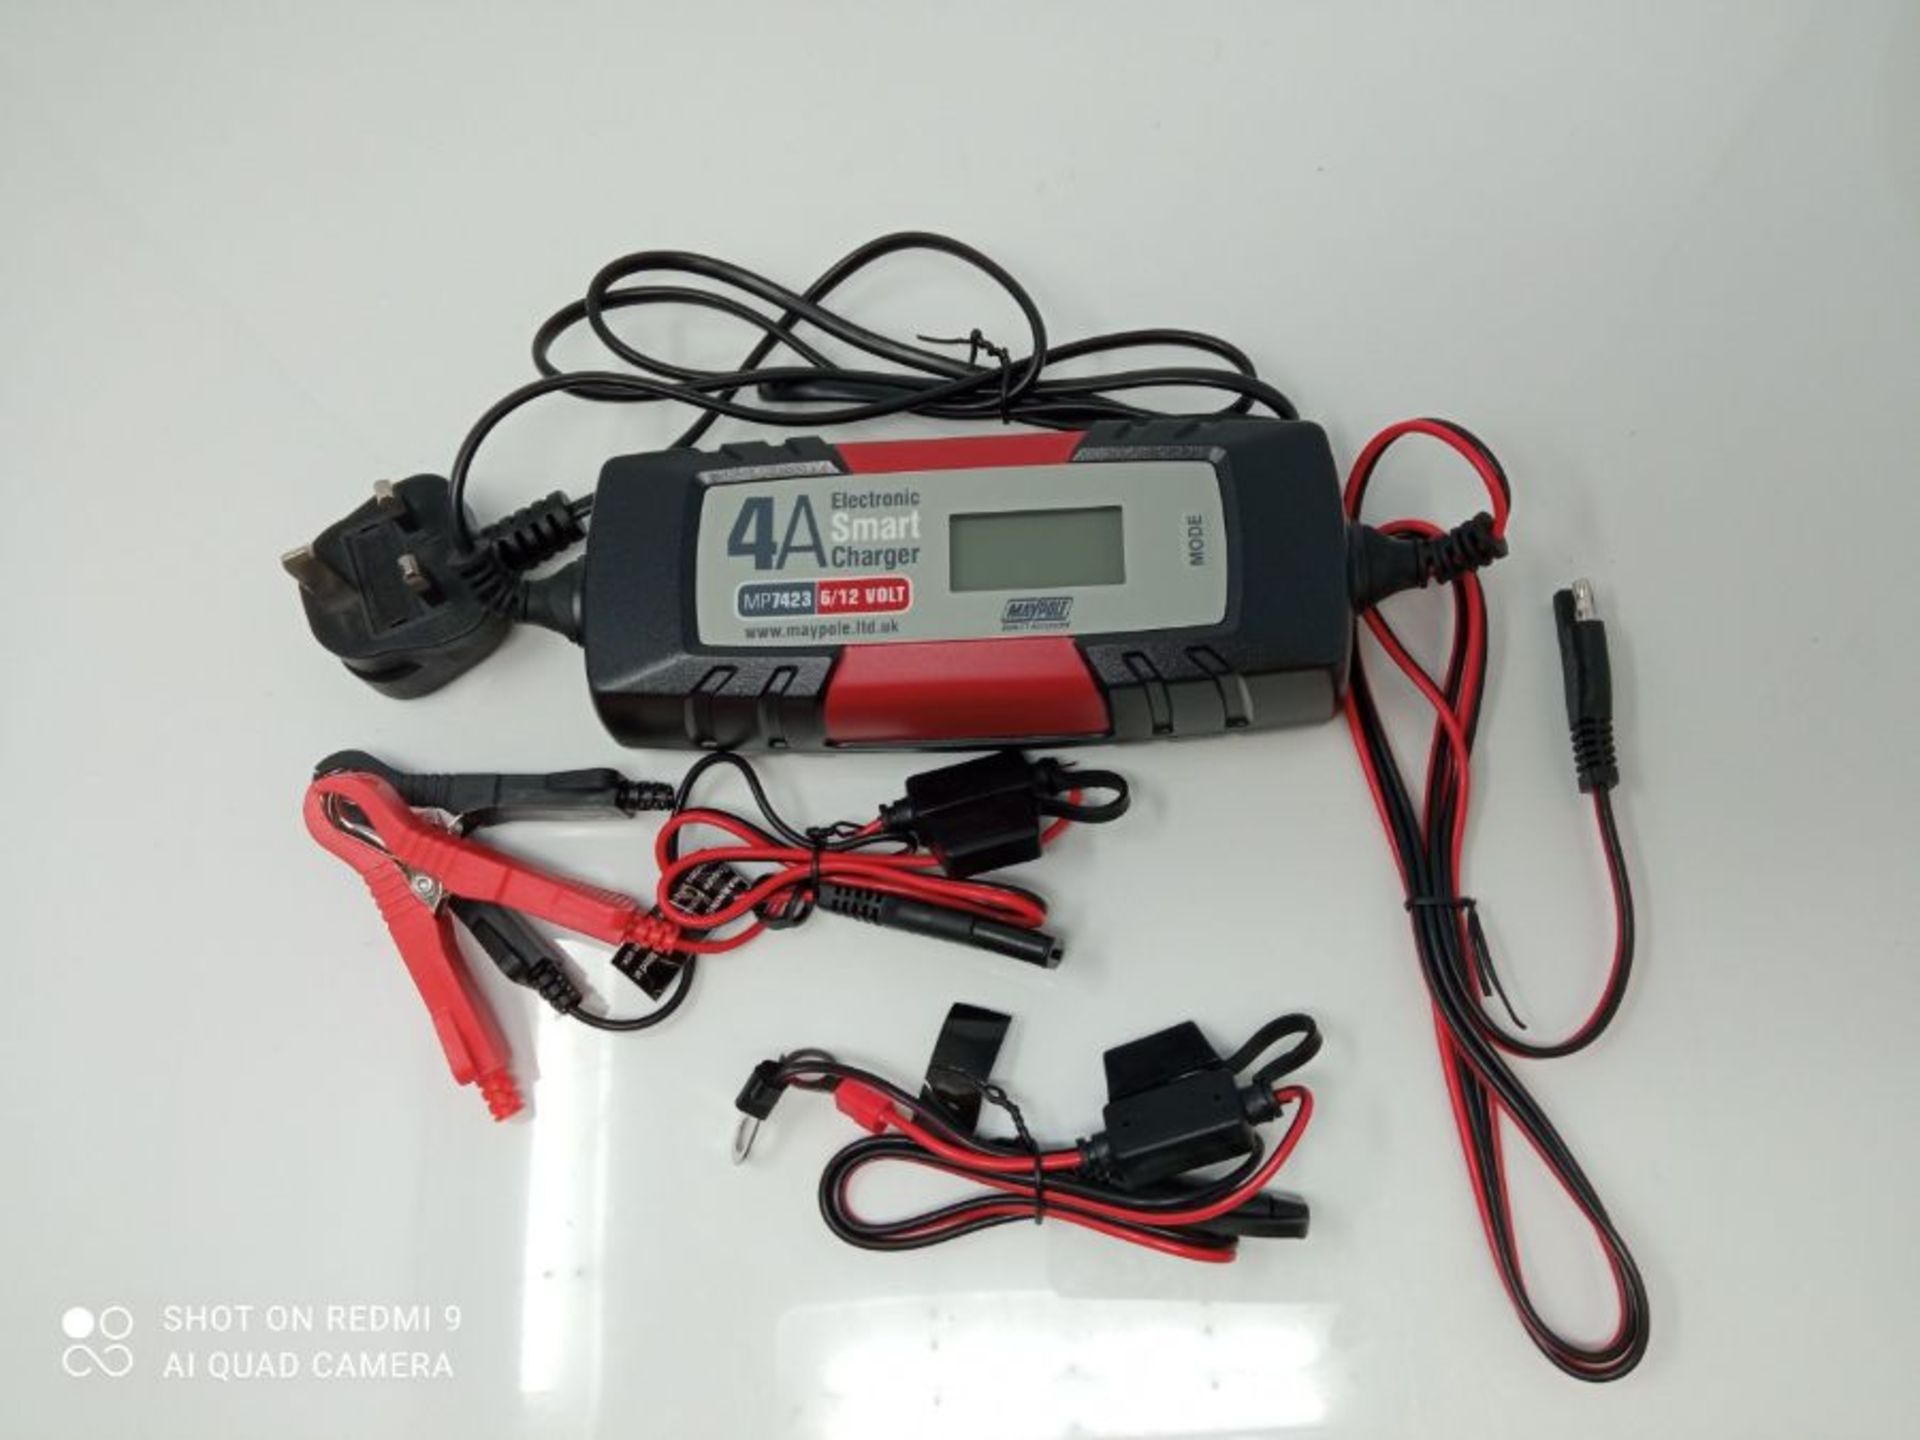 Maypole 7423A Battery Charger Auto Electronic 4A 12V - Image 3 of 3